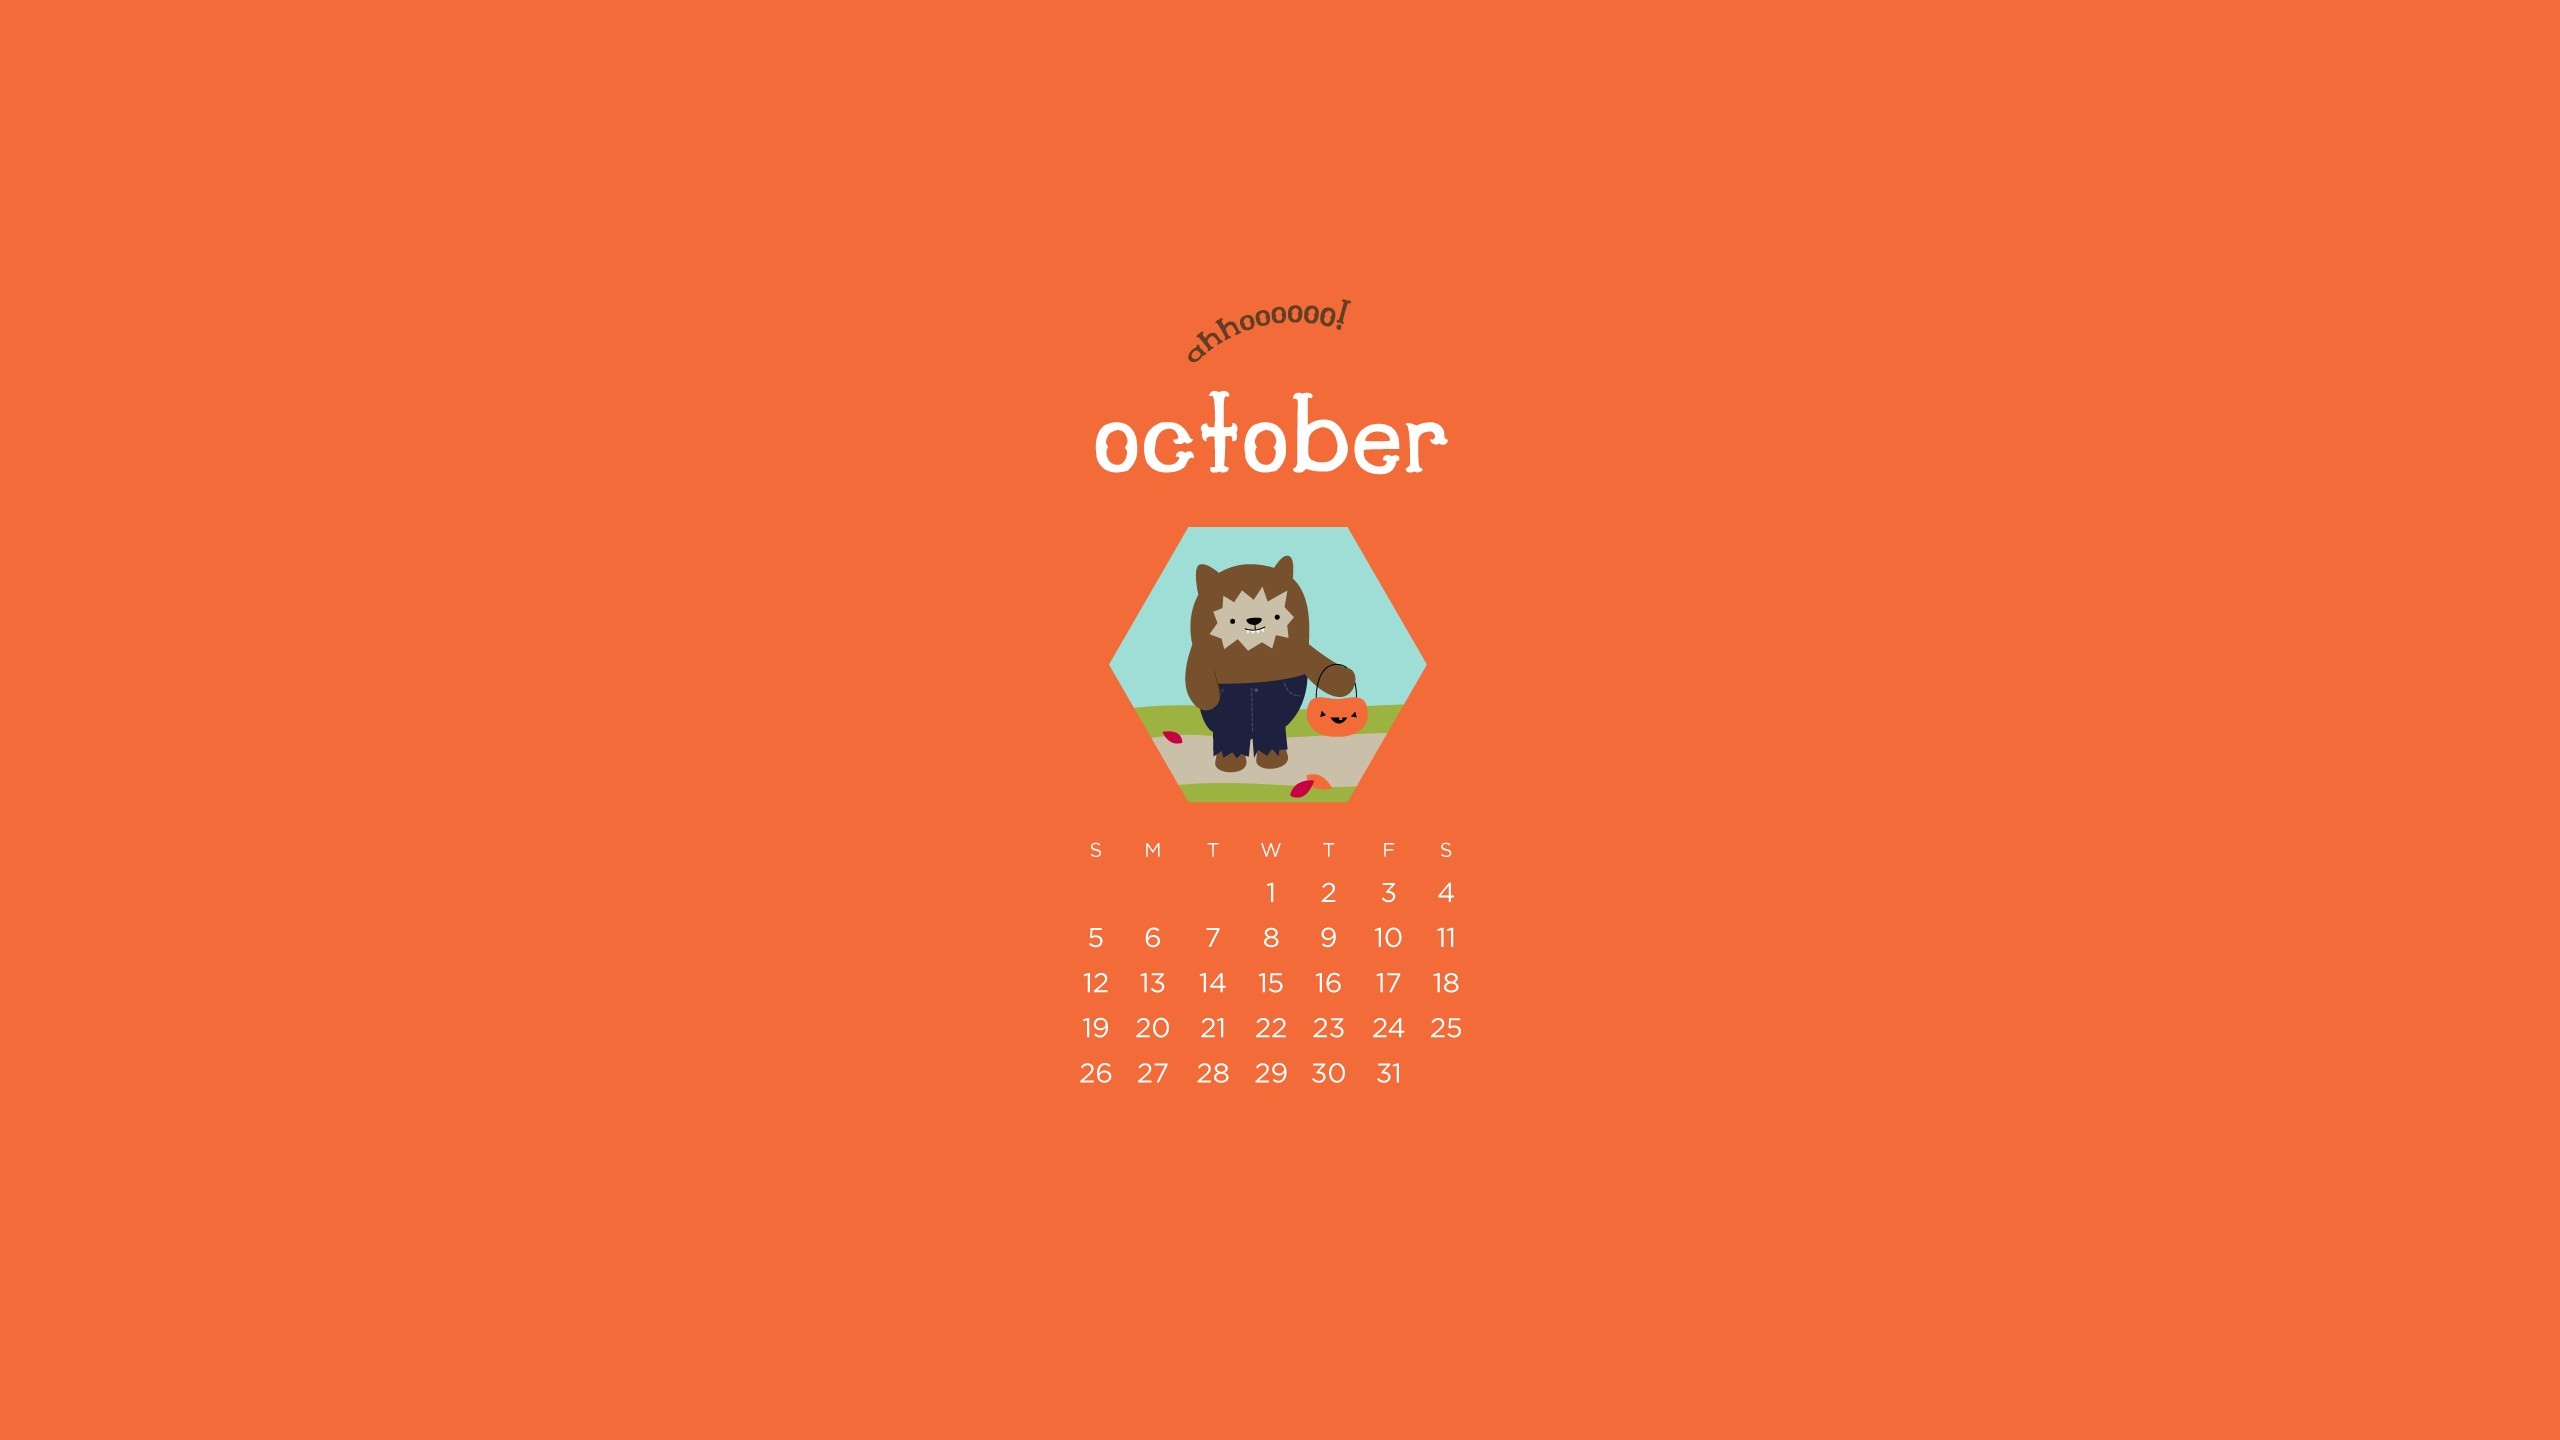 2560x1440 14, 2015 By admin Comments Off on October 2015 Calendar Wallpapers .